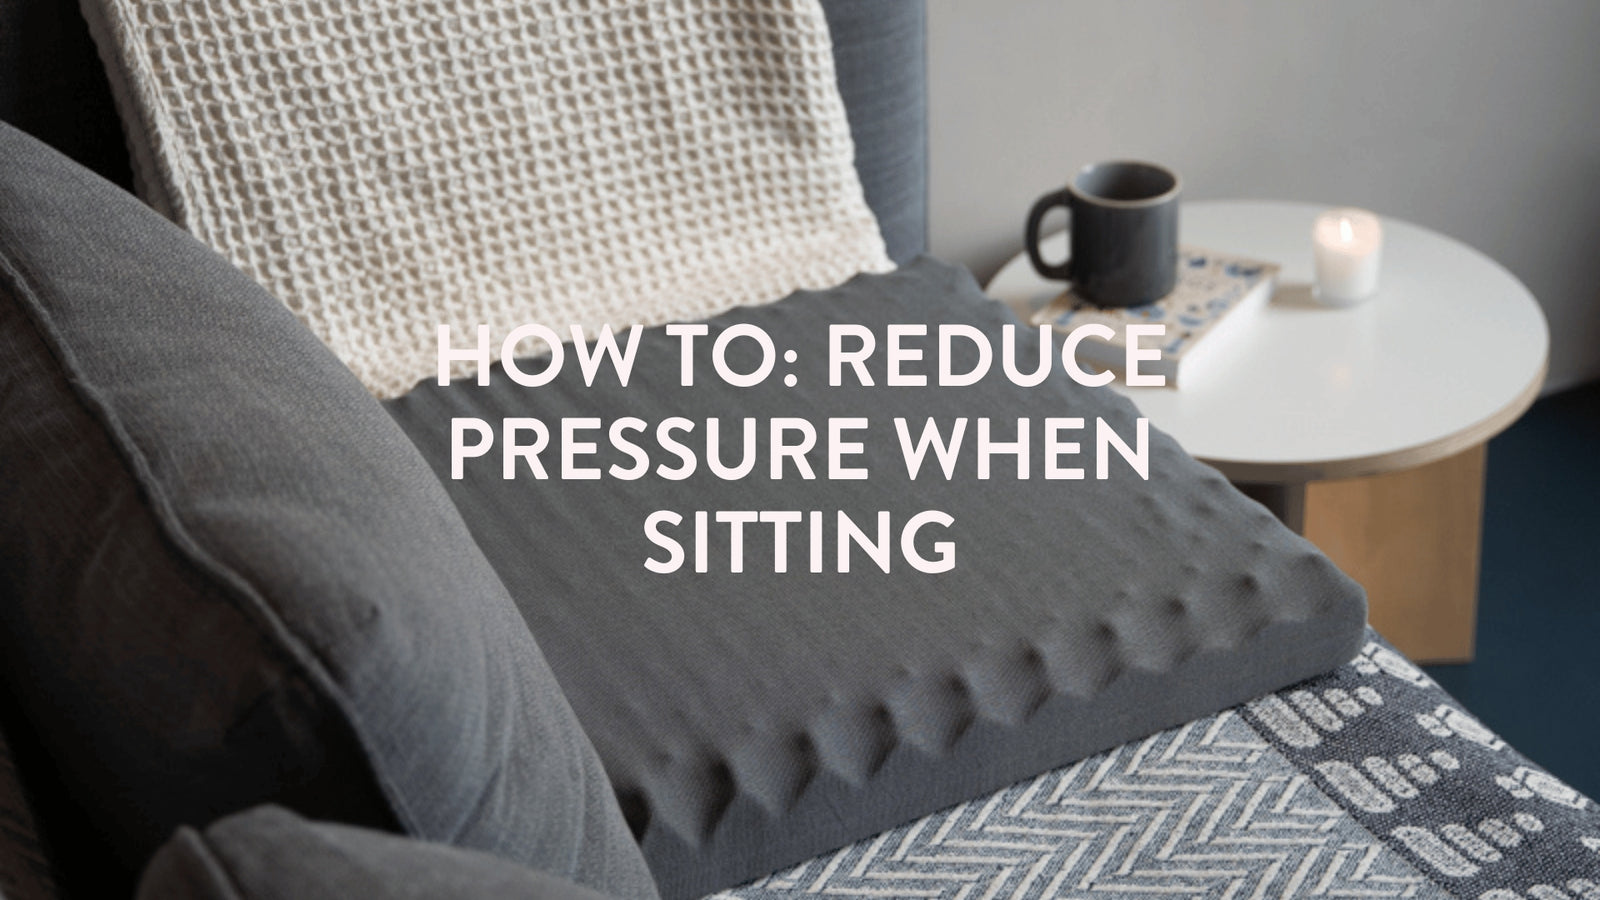 How to: reduce pressure when sitting.